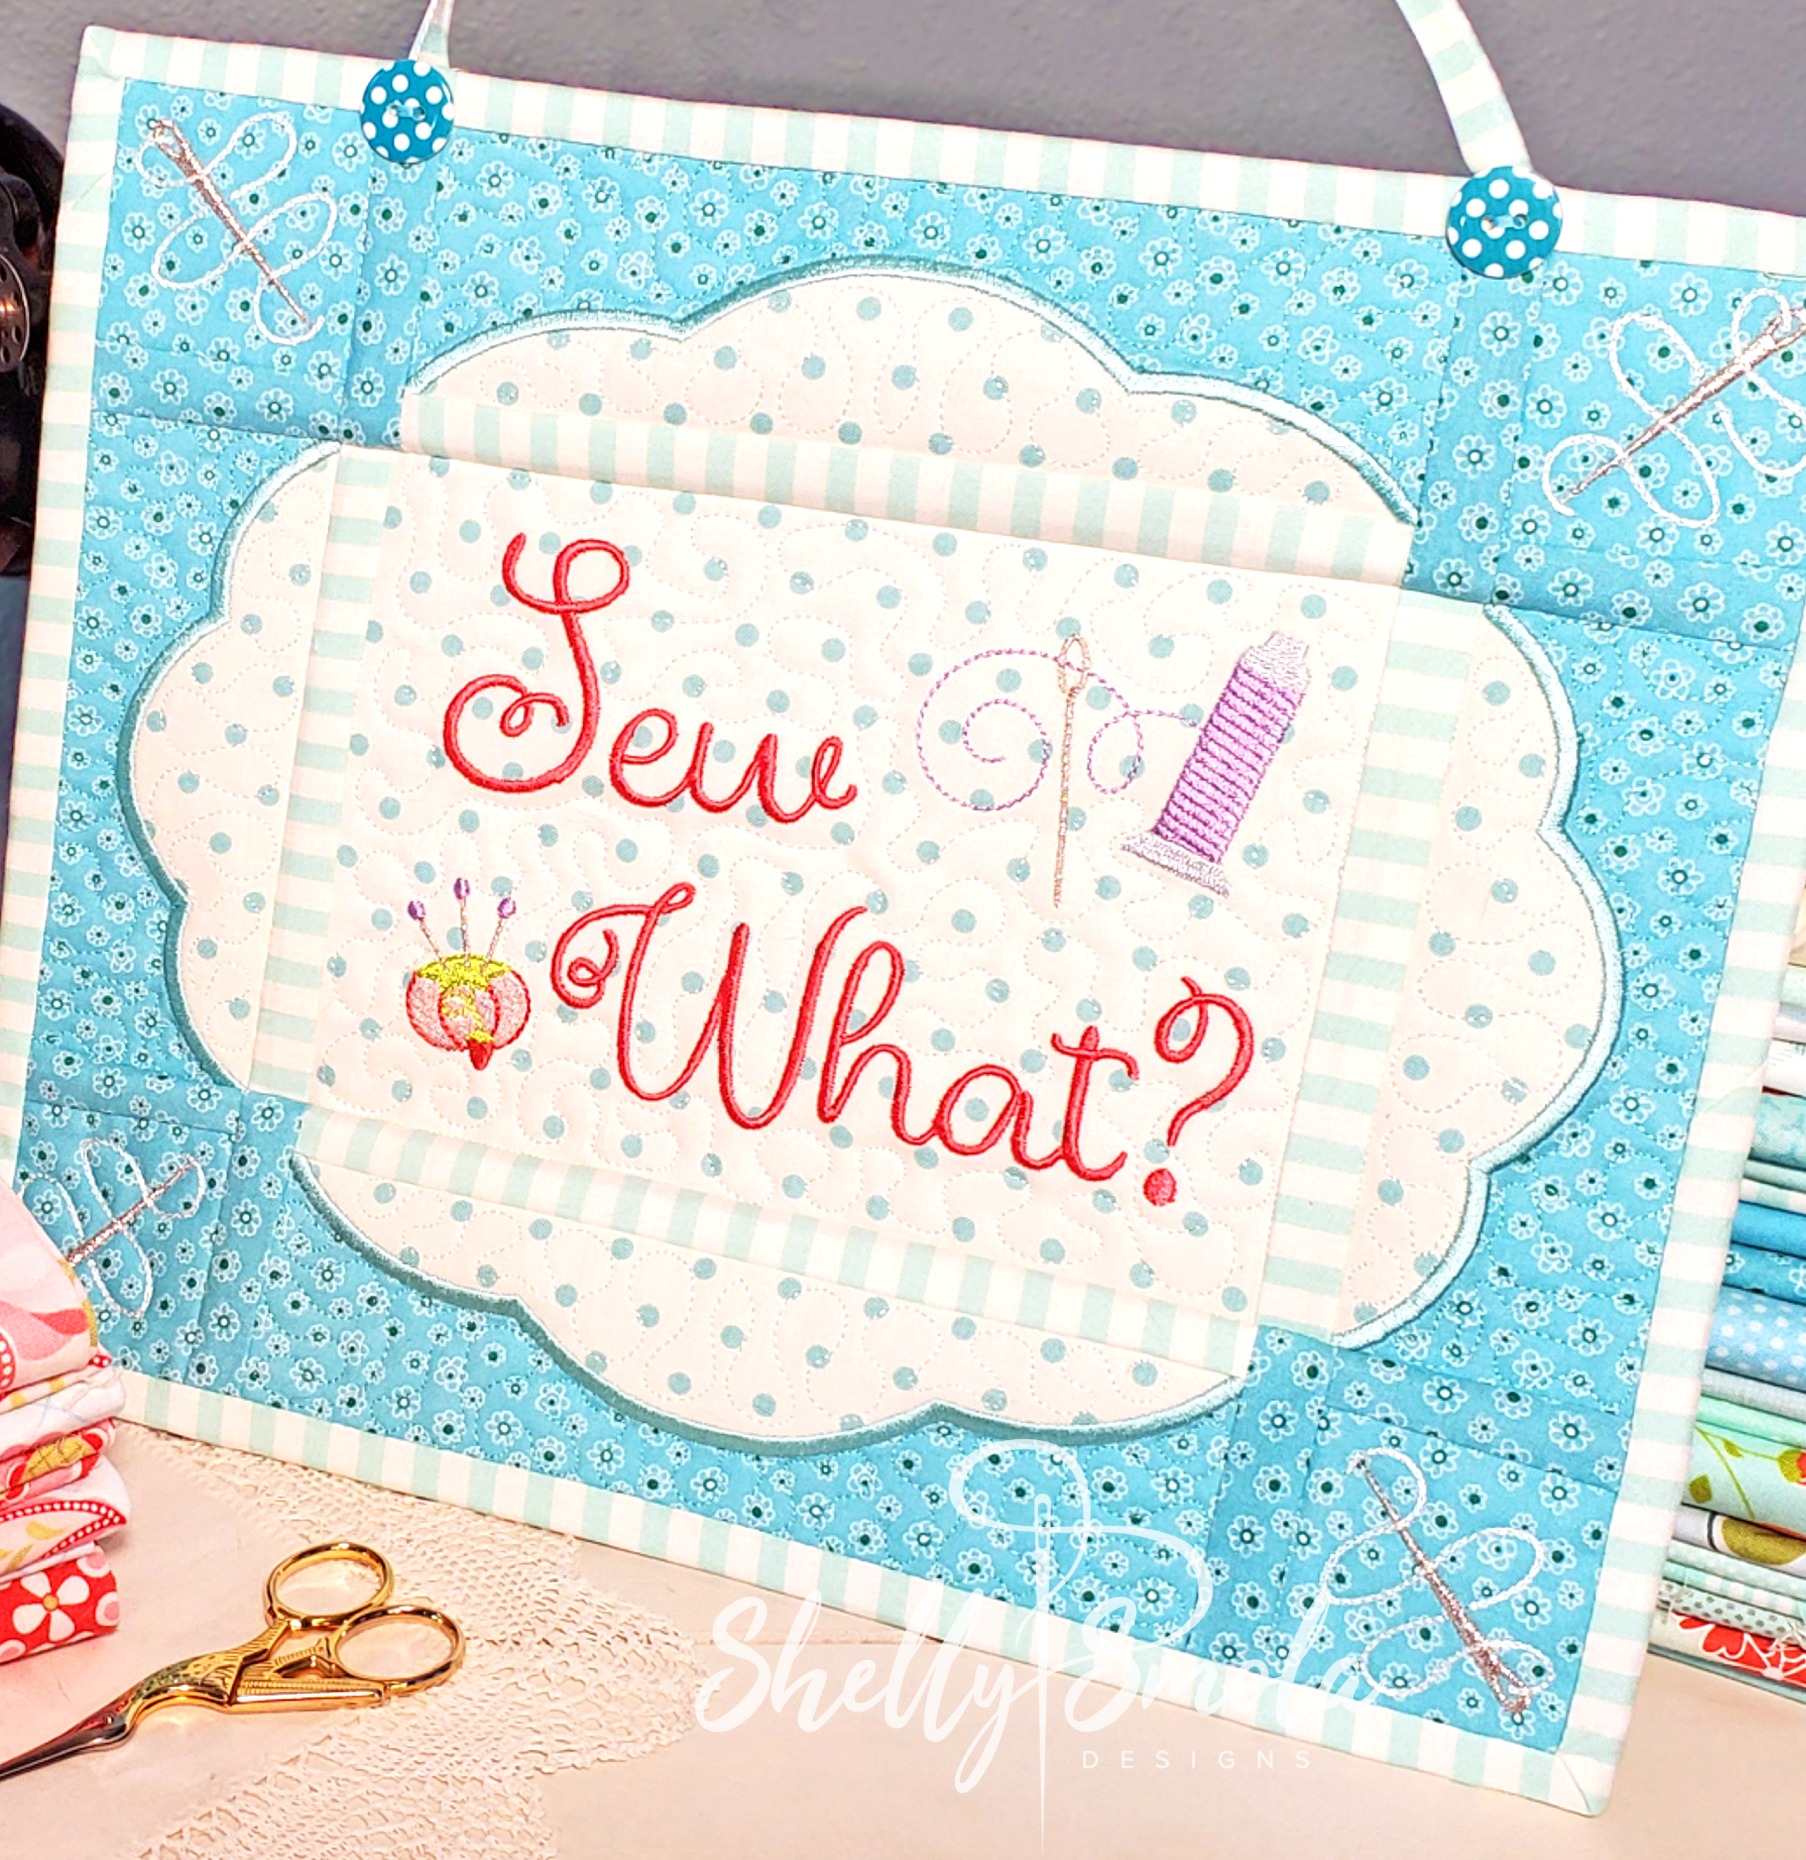 Sew Crazy - Sew What by Shelly Smola